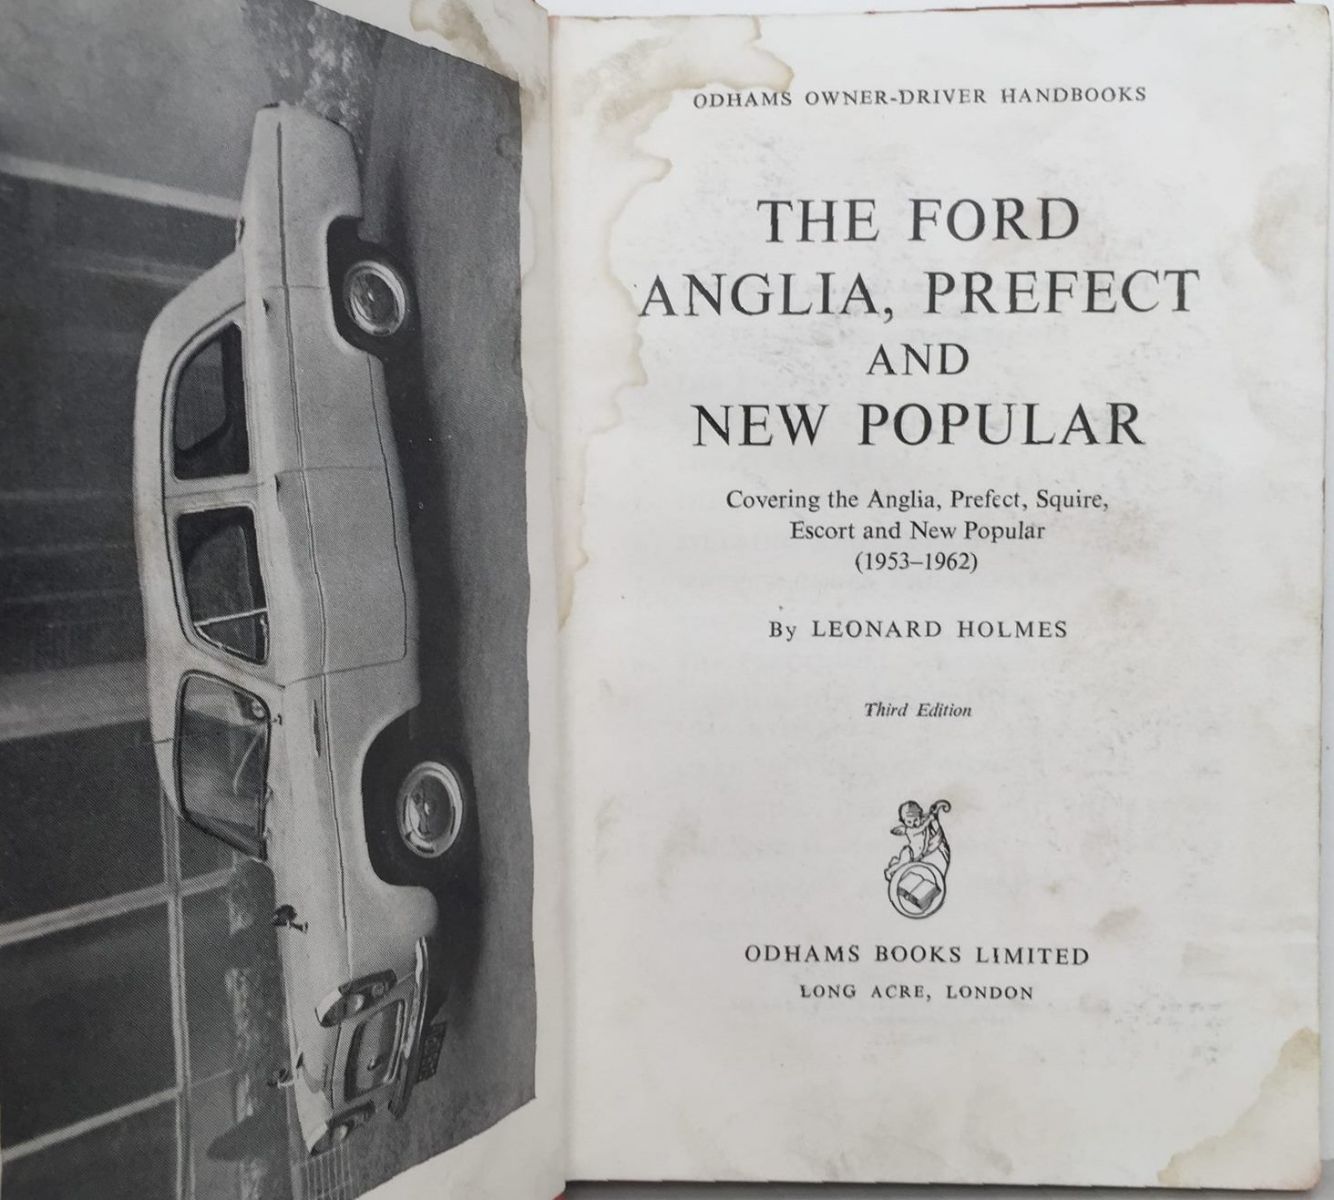 ODHAMS HANDBOOK: Covering the Anglia - Prefect - Squire - Escort and New Popular 1953 - 1962